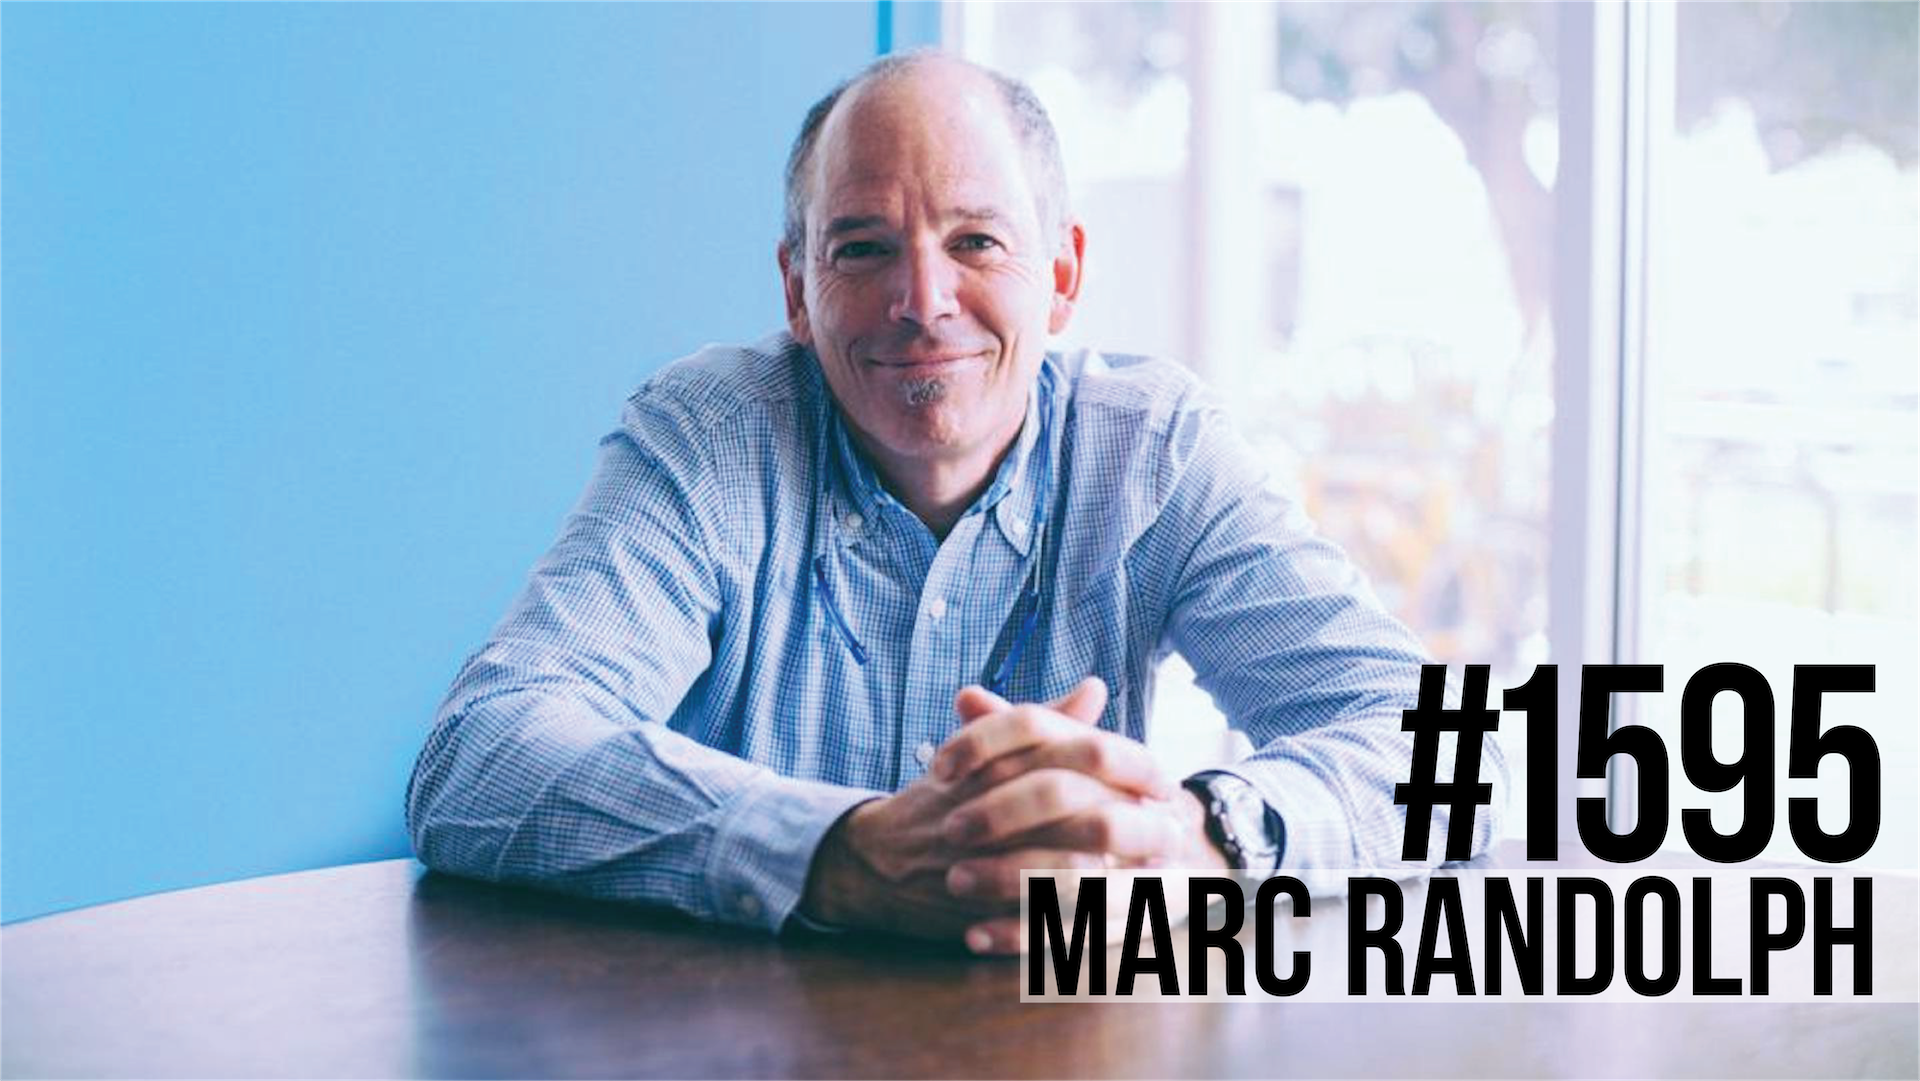 1595: Your Ideas Suck… How to be an Entrepreneur With Netflix Co-Founder Marc Randolph